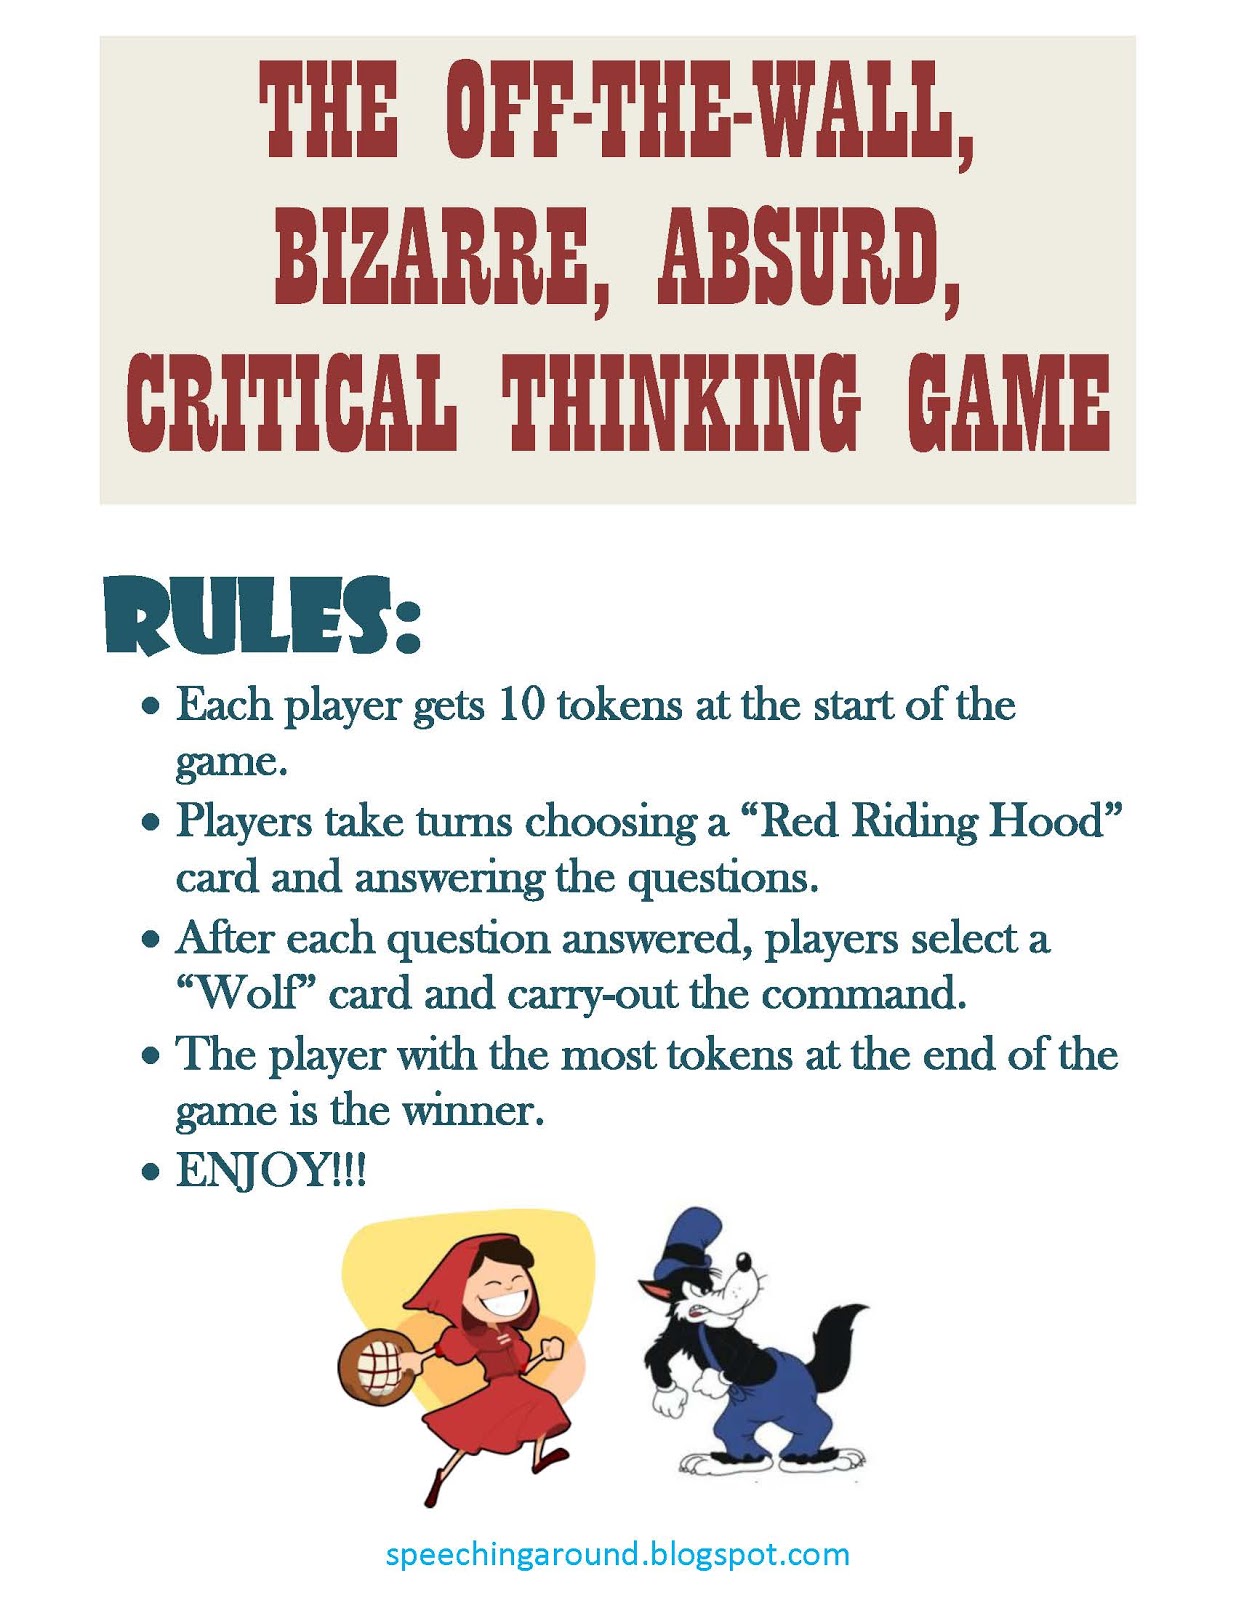 Class exercises for critical thinking